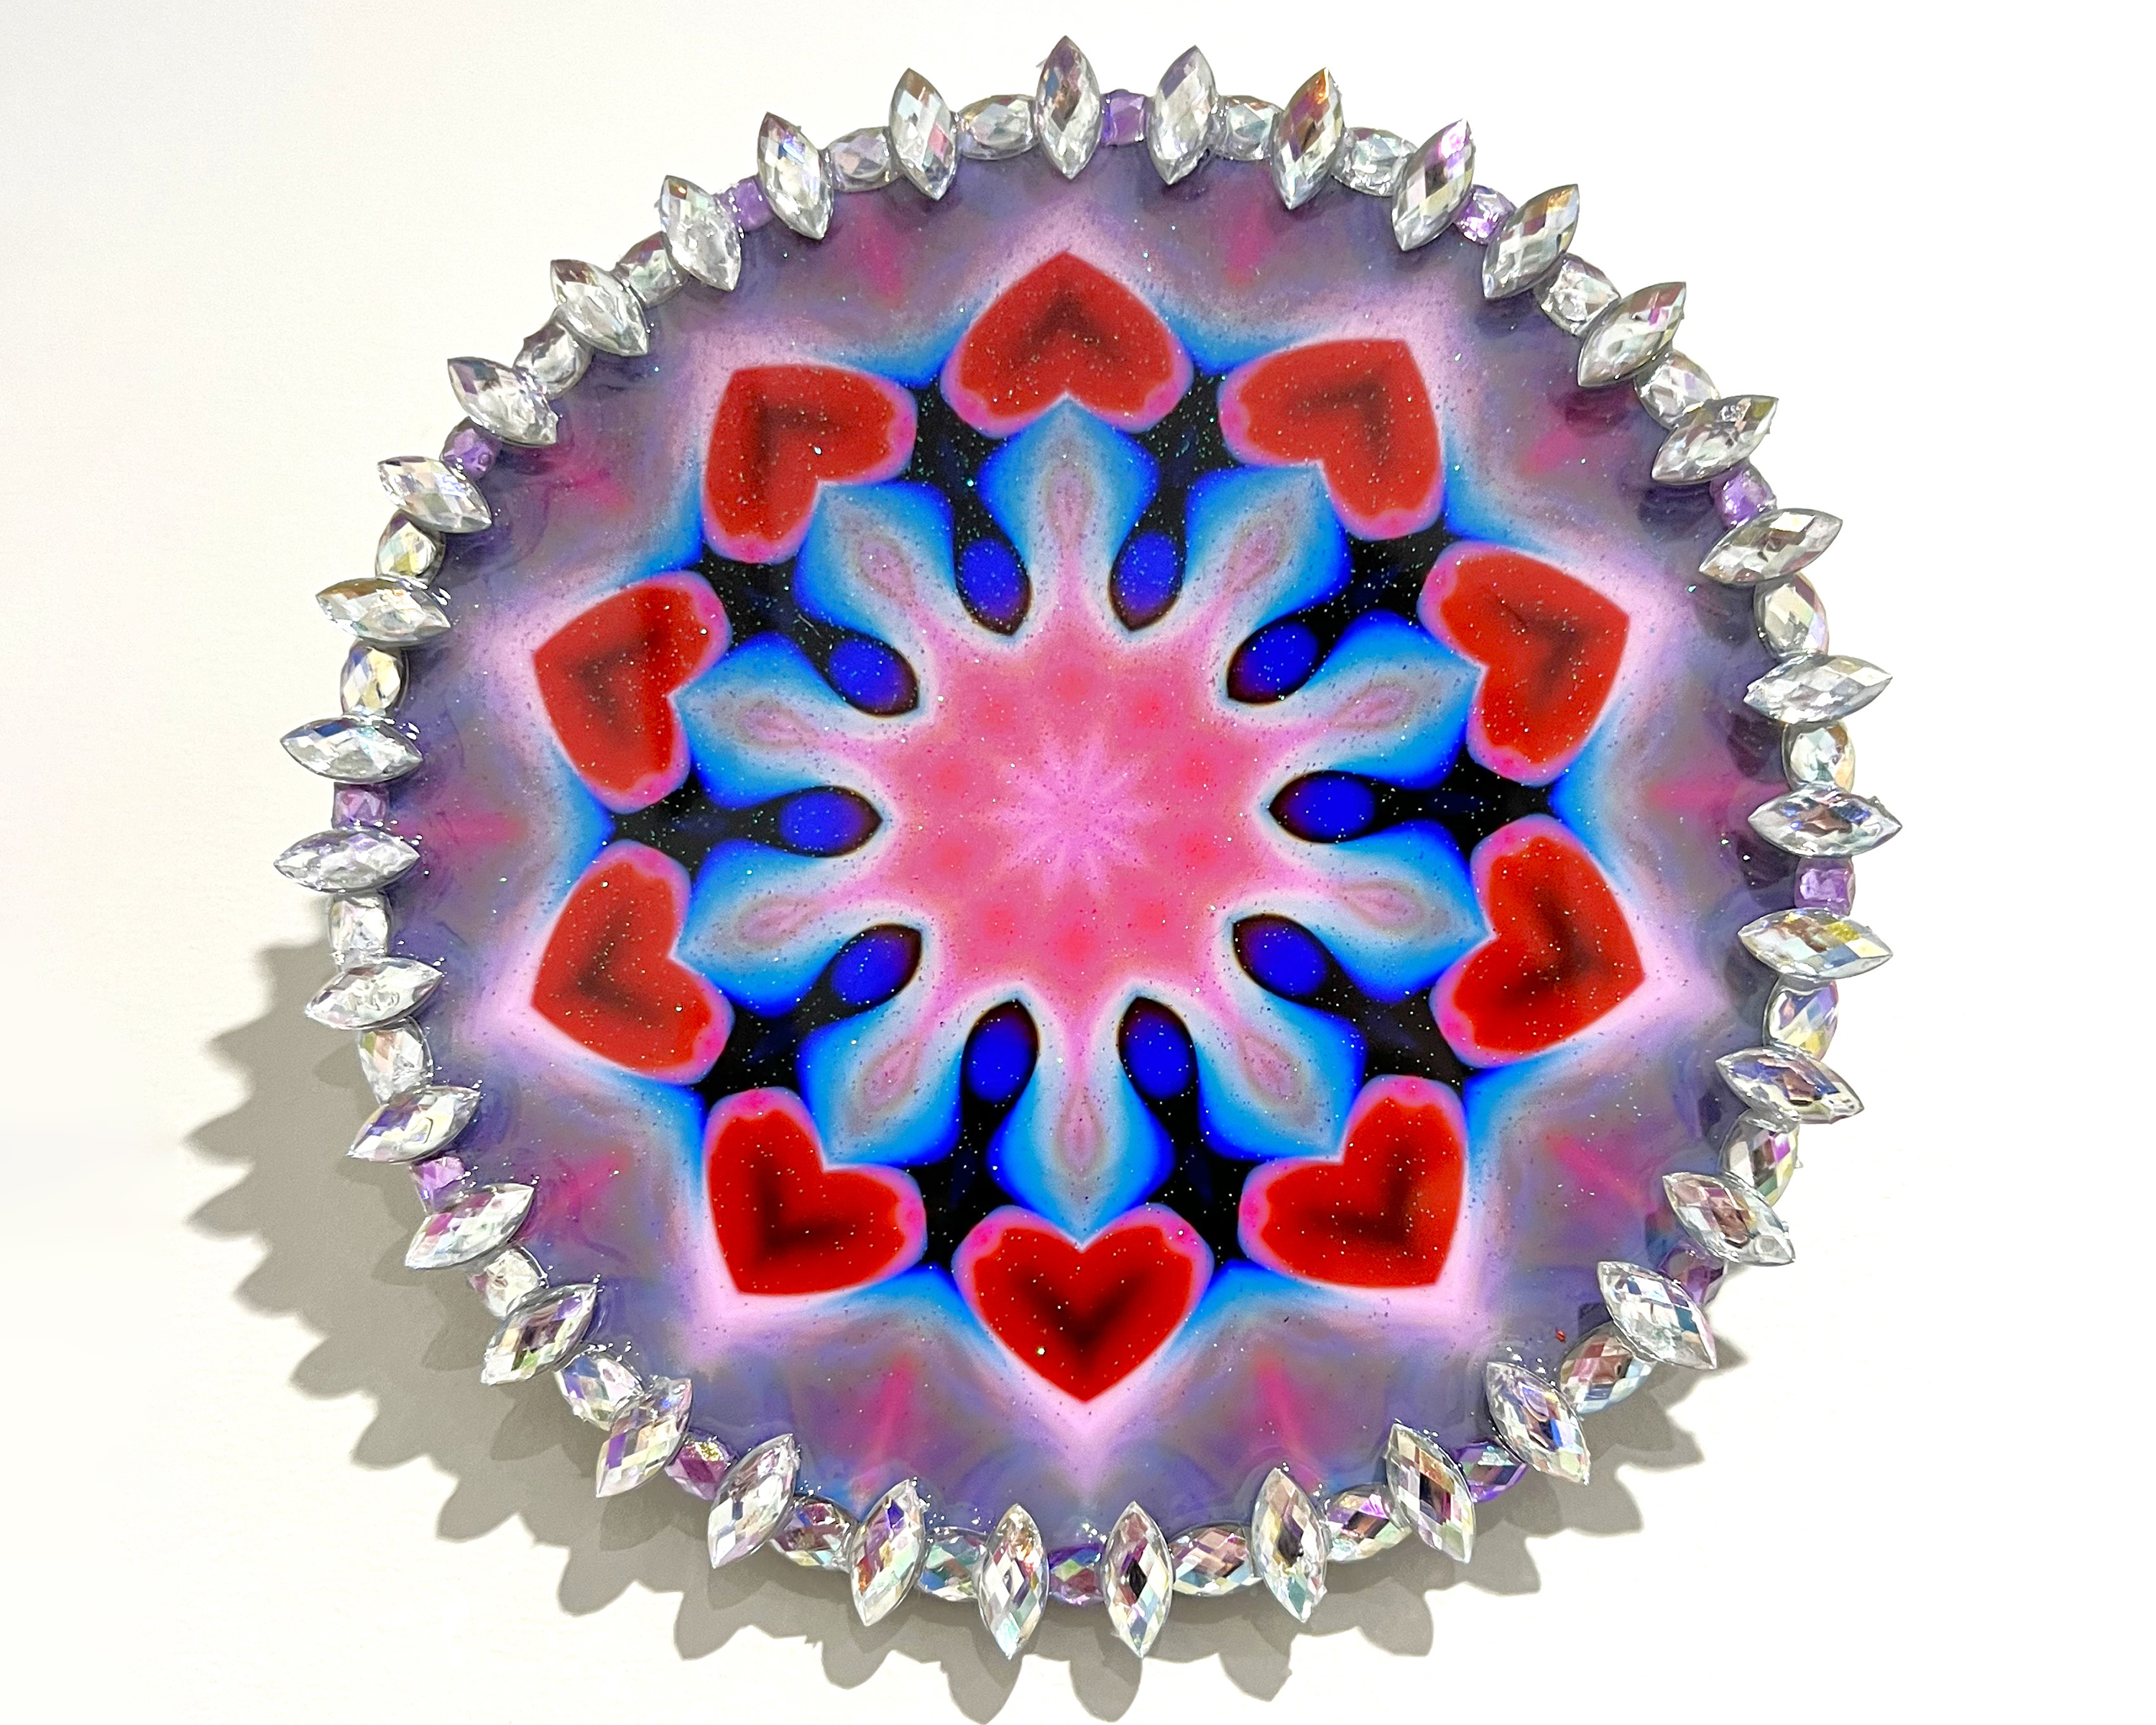 A circular abstract image in reds, blues and purples with a border of clear jewels.